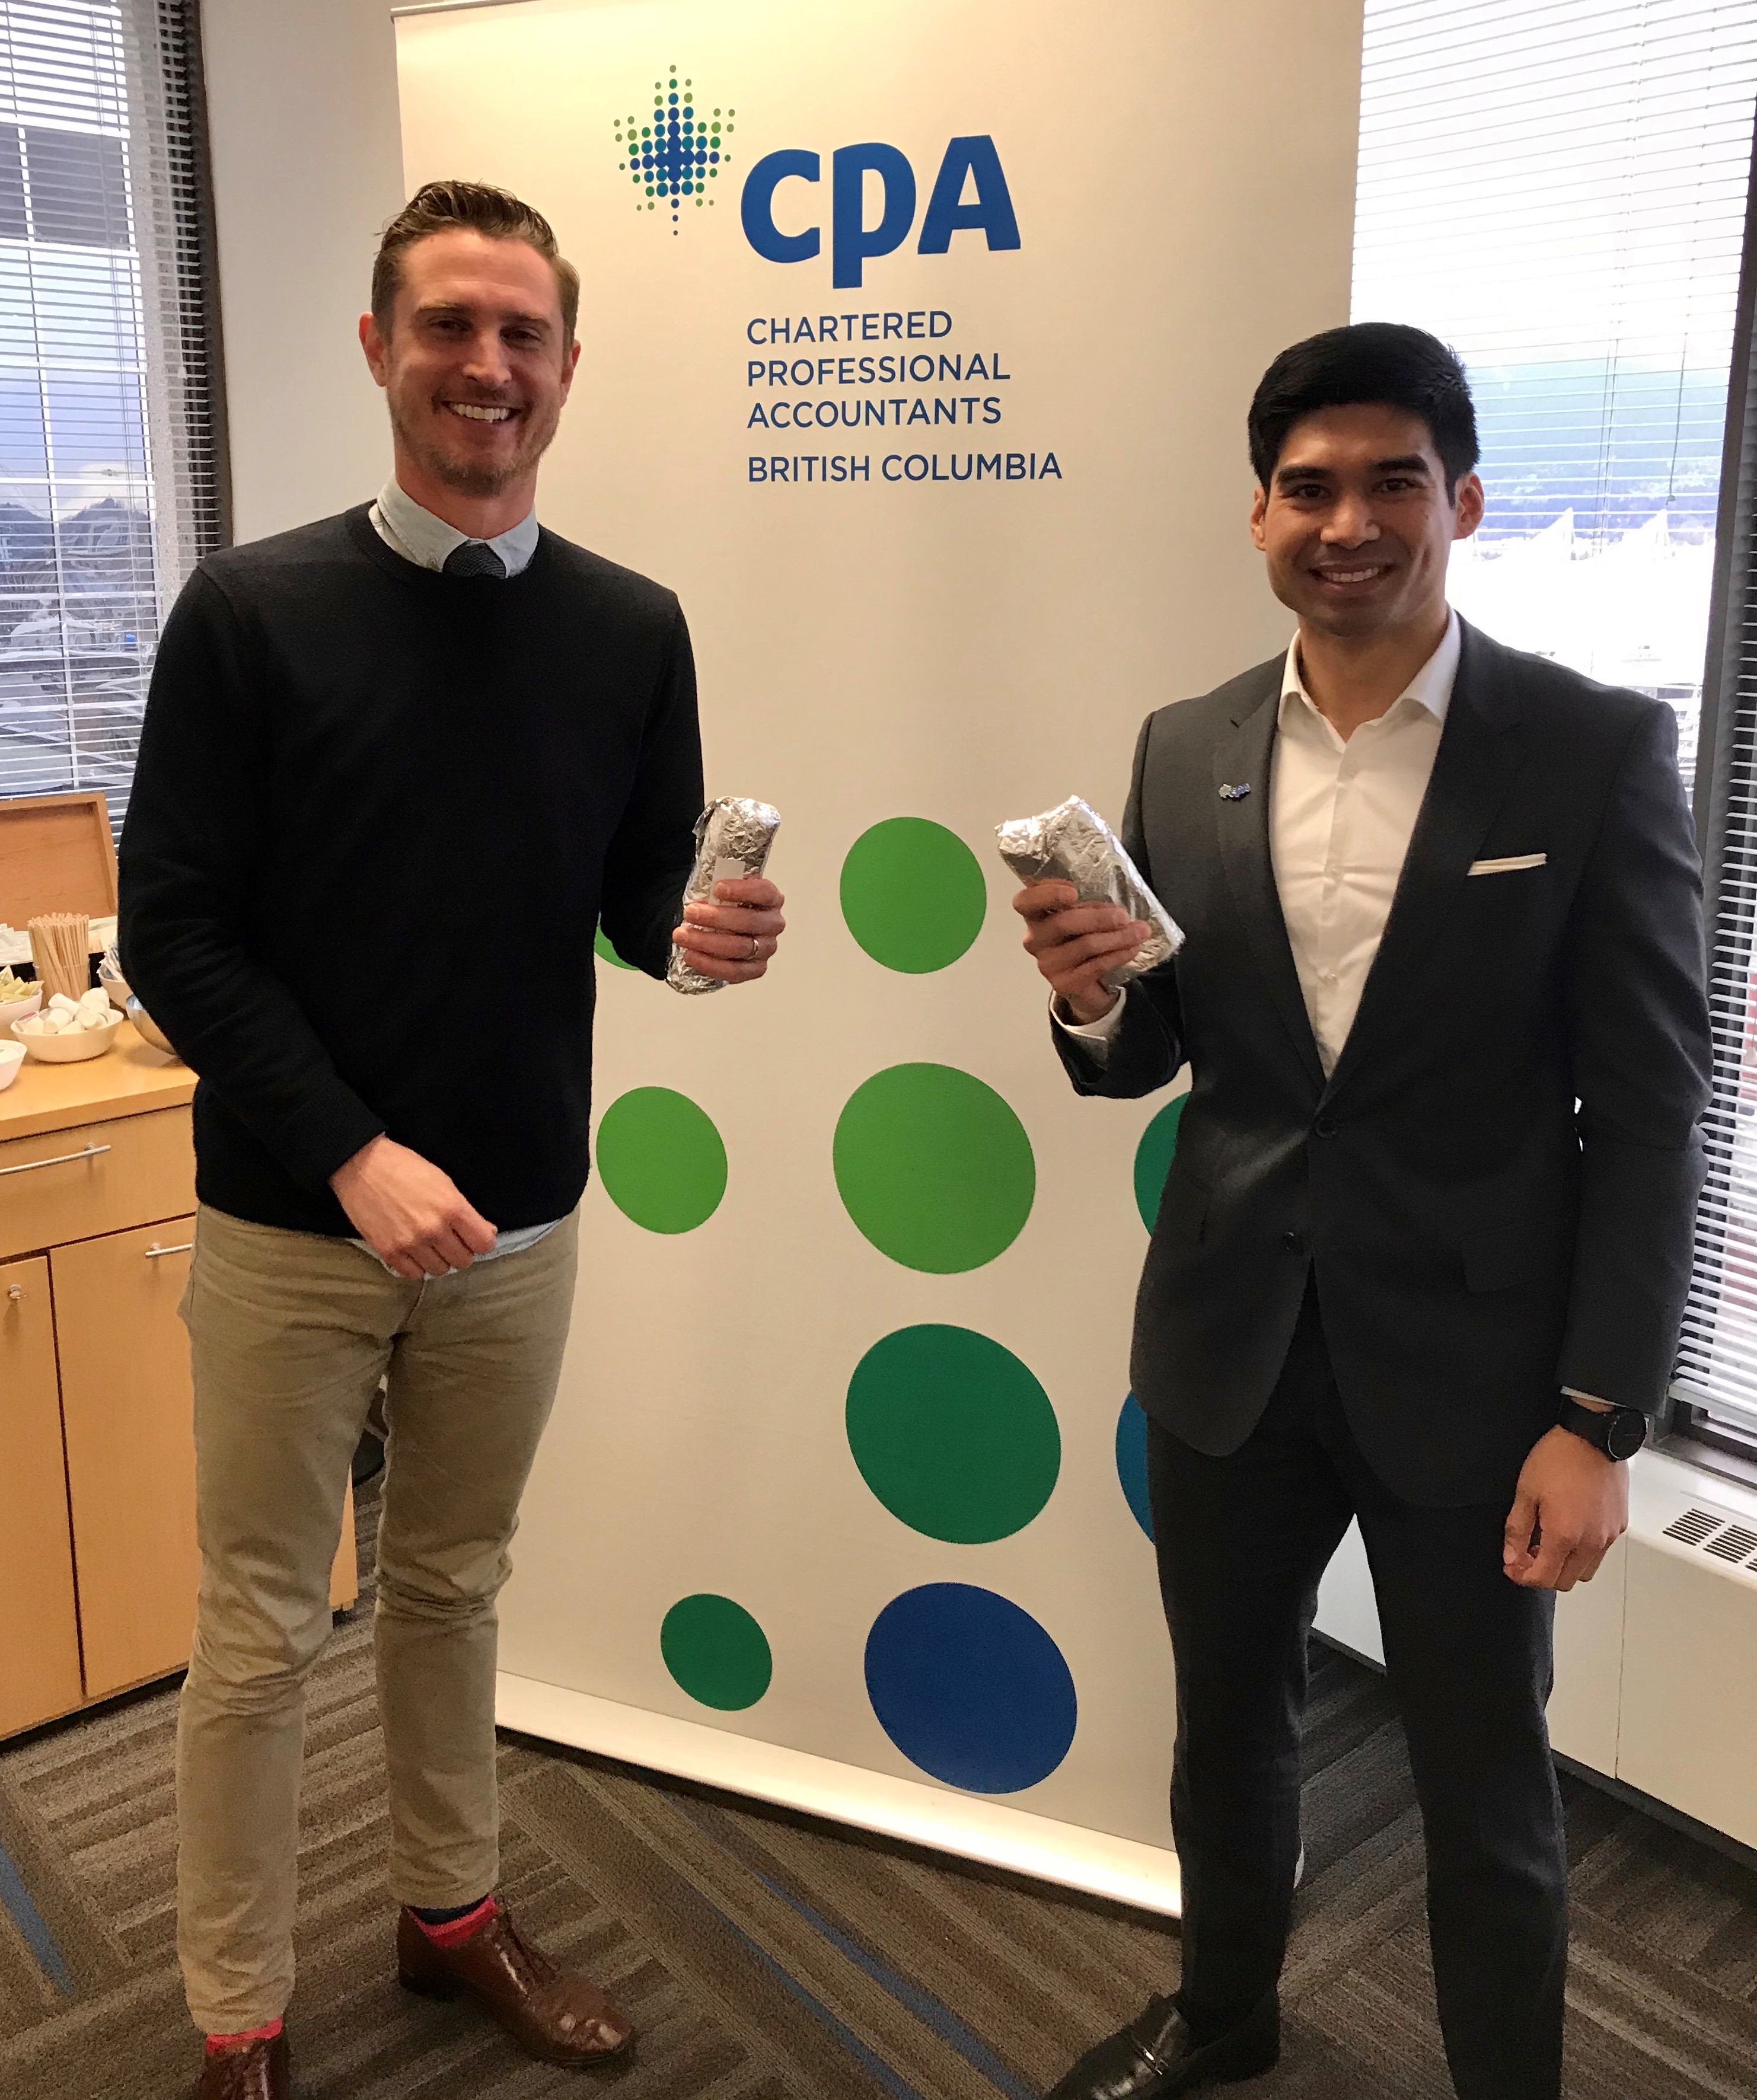 CPABC Young Pros Host “Ask Me Anything” with Lawrence Eade CPA CA